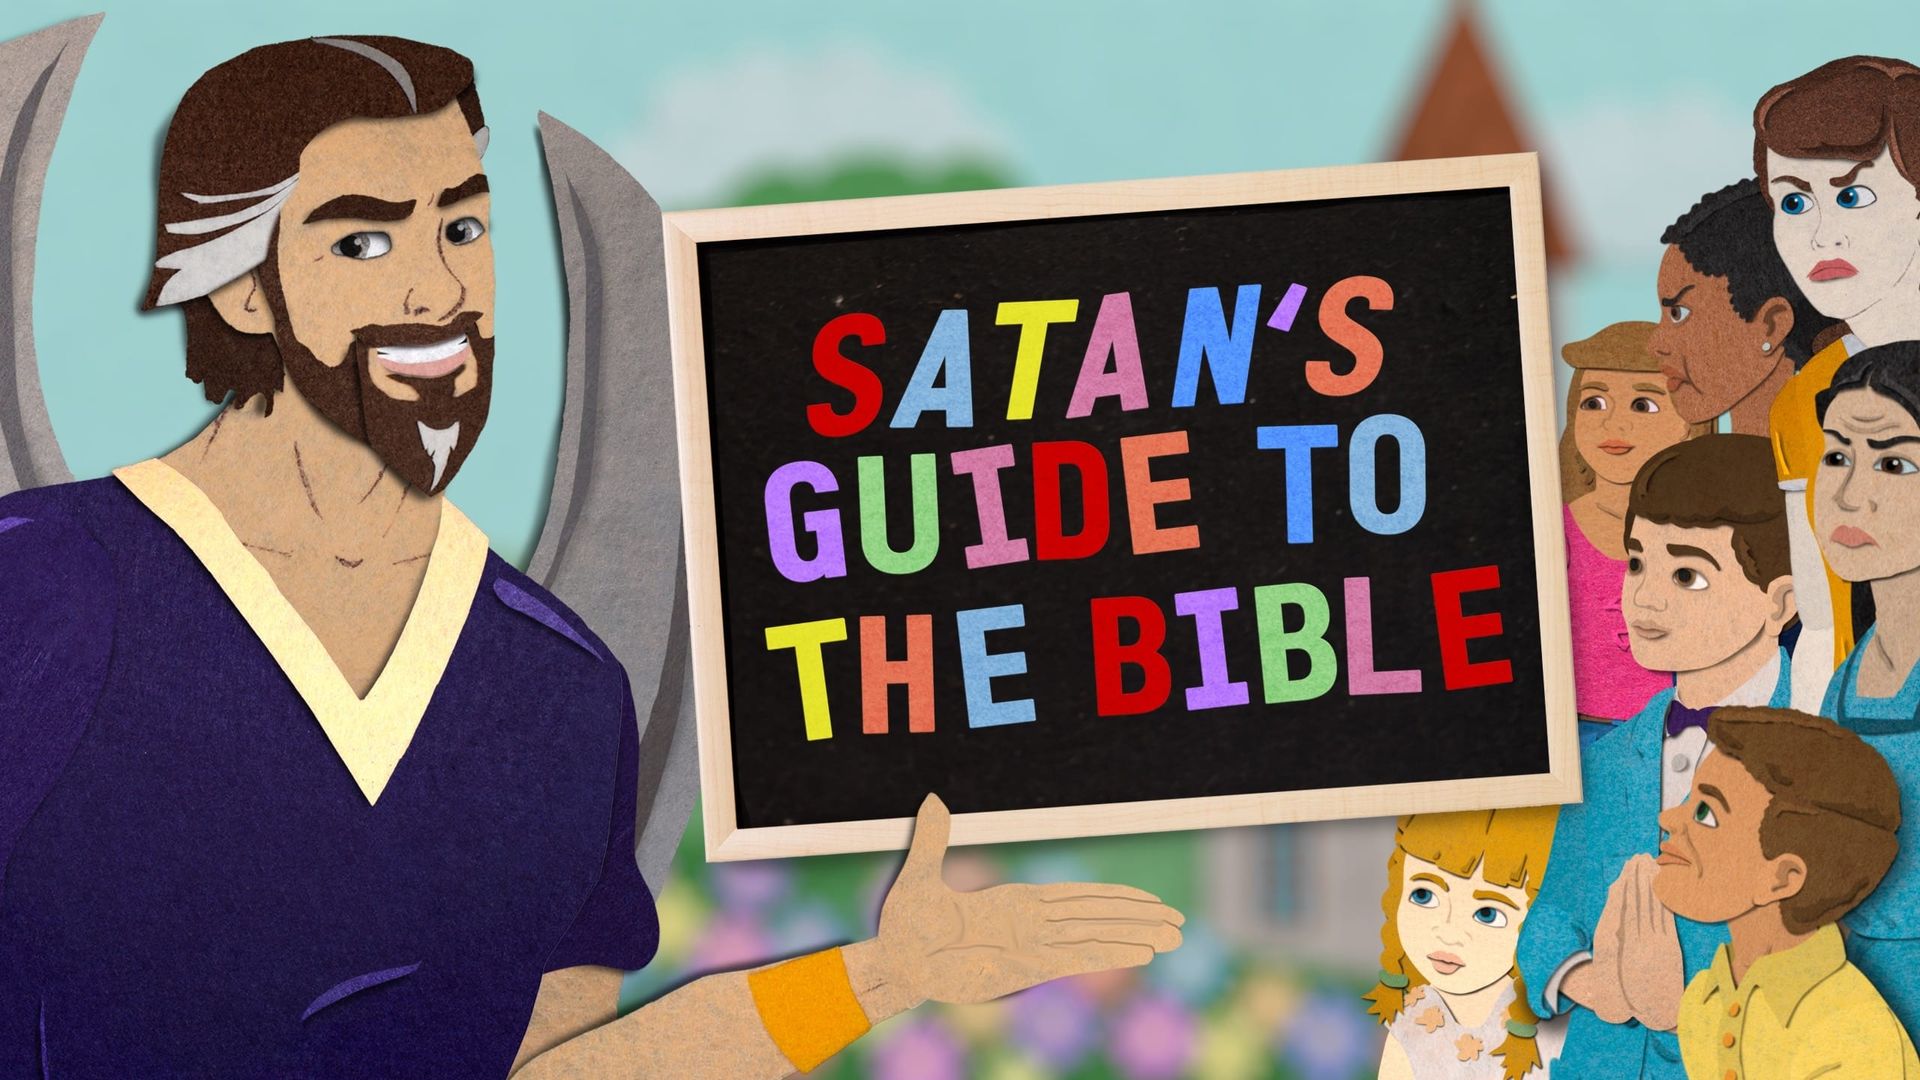 Satan's Guide to The Bible background